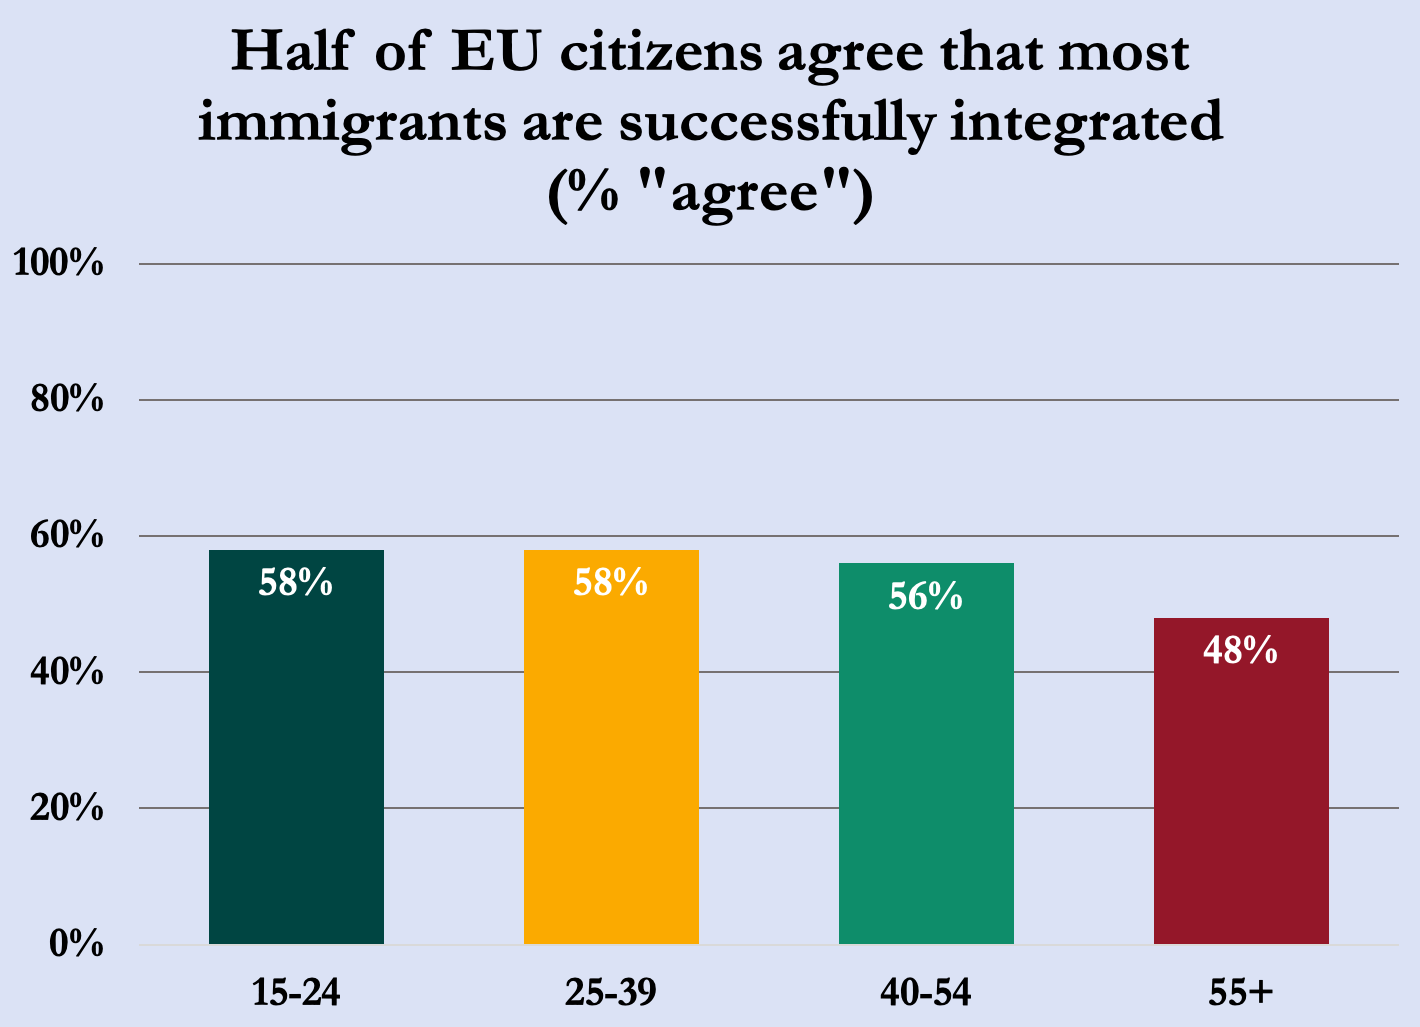 Perceived success of immigrant integration disaggregated by age